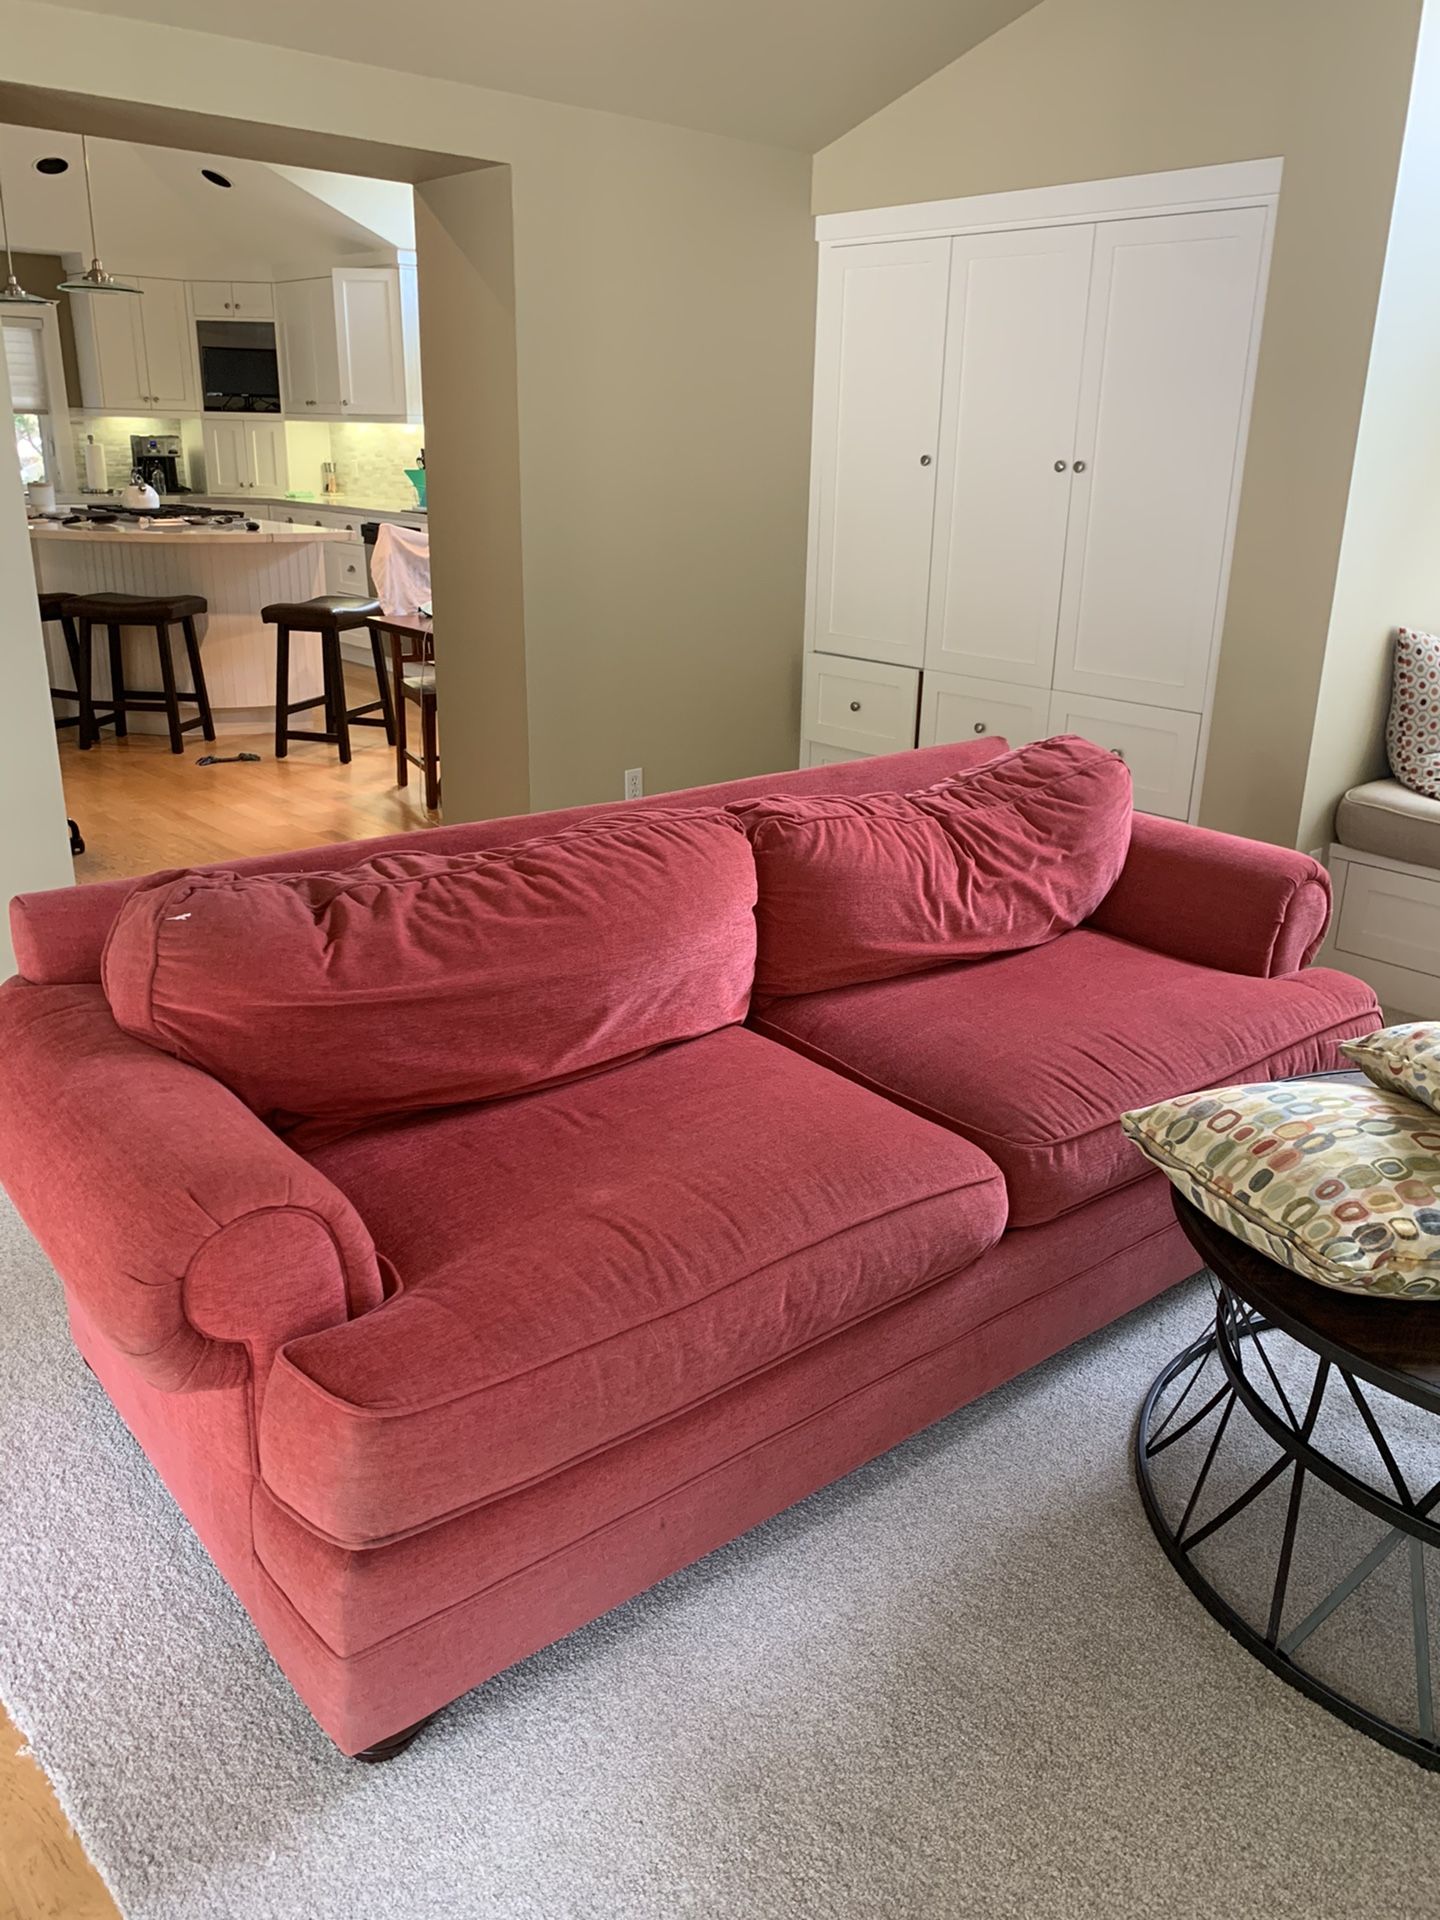 FREE!!!!! Red plush couch